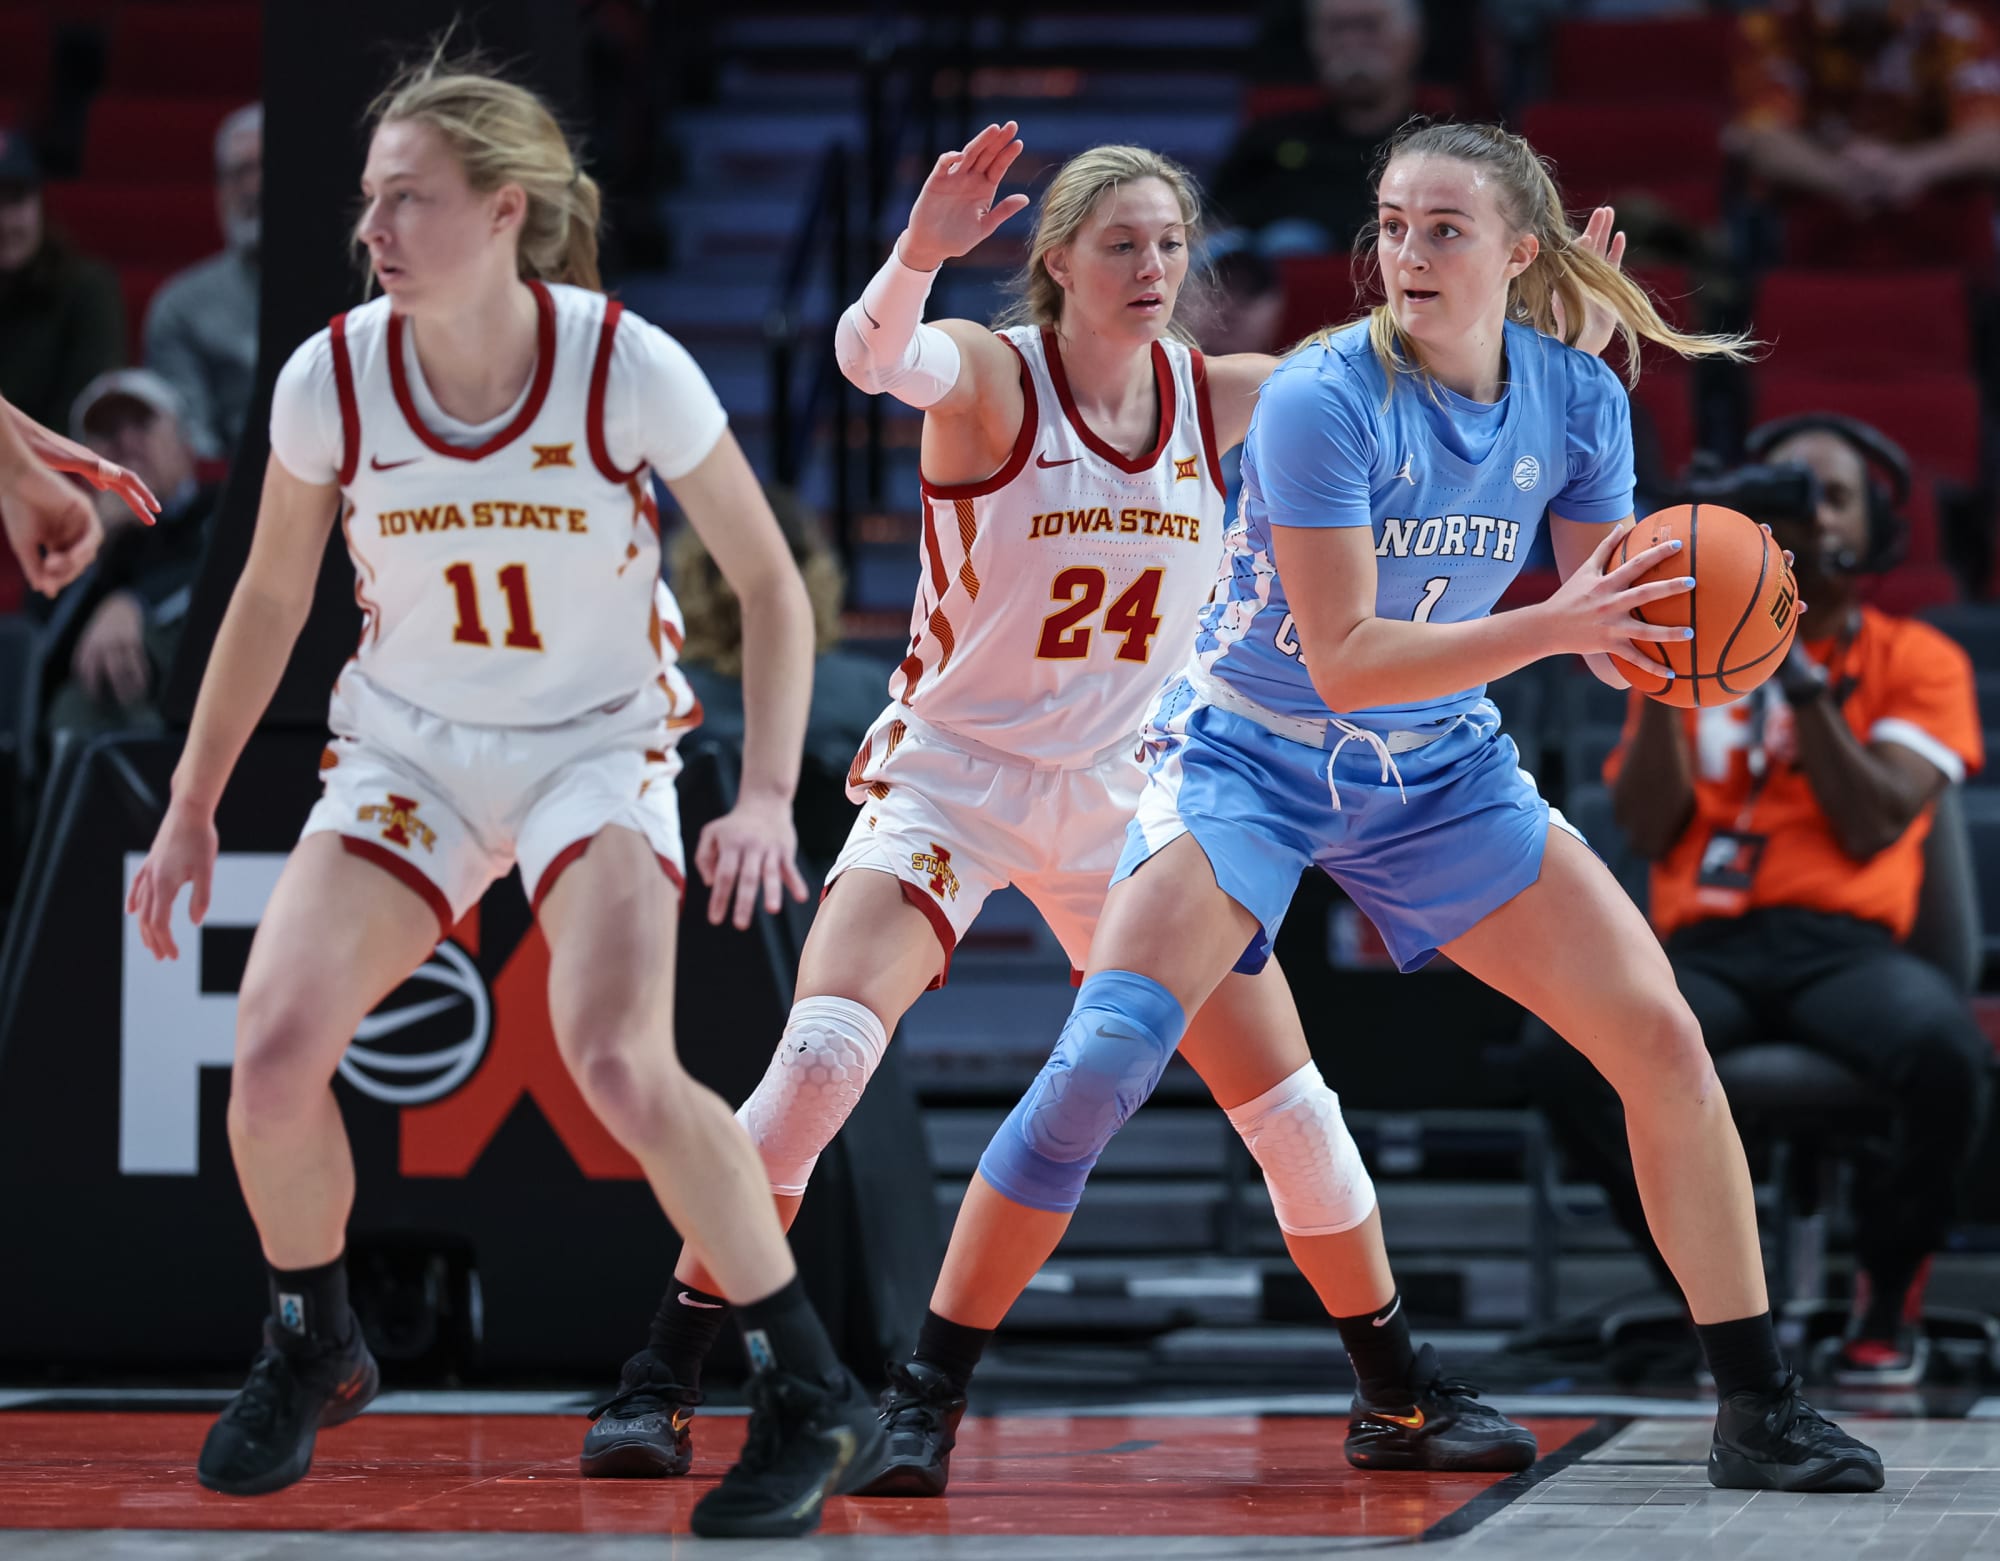 UNC Basketball: Alyssa Ustby named USBWA National Player of the Week